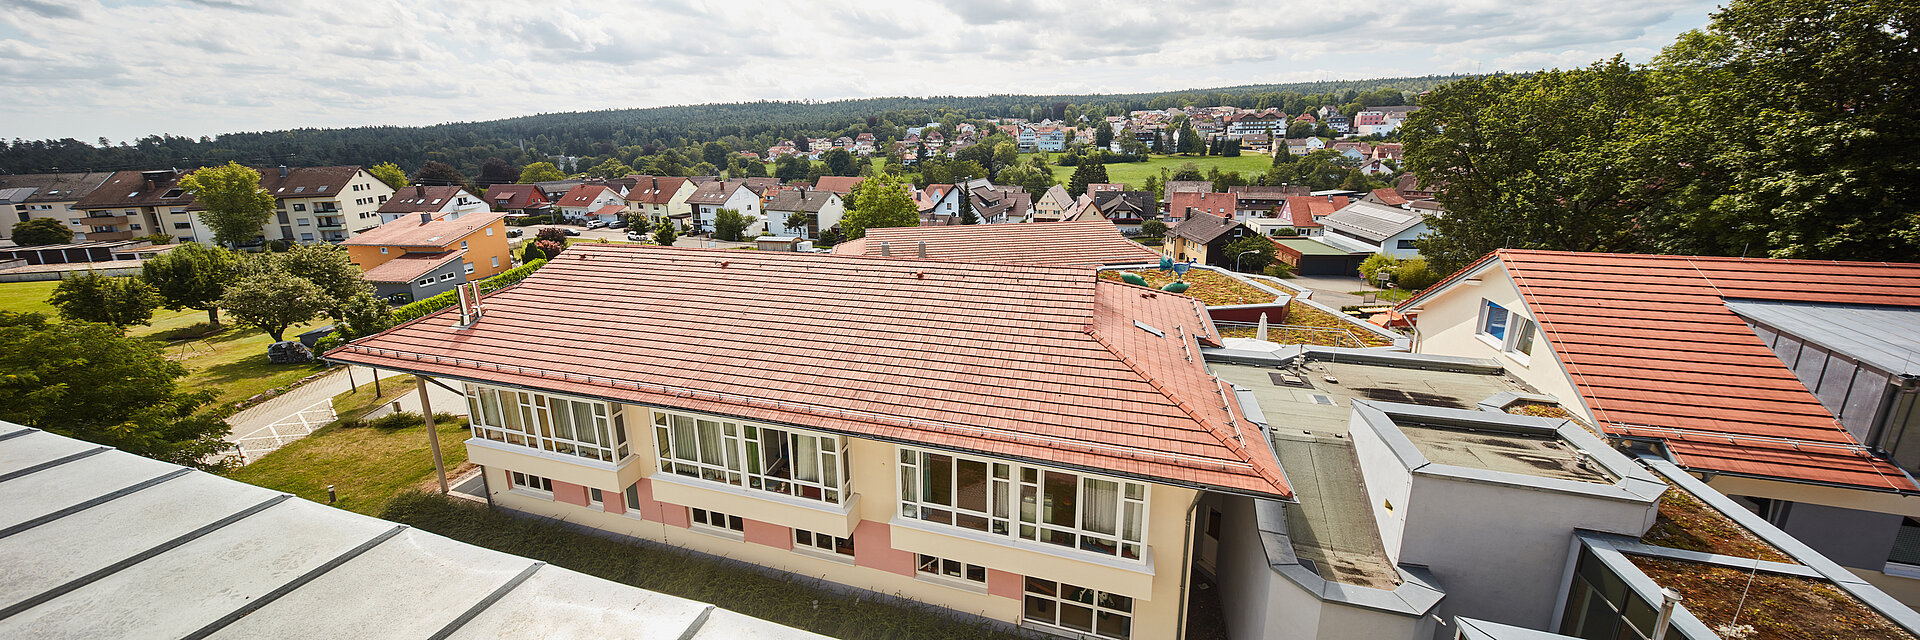 Image: Top view of the buildings of the Schömberg Children's Hospital